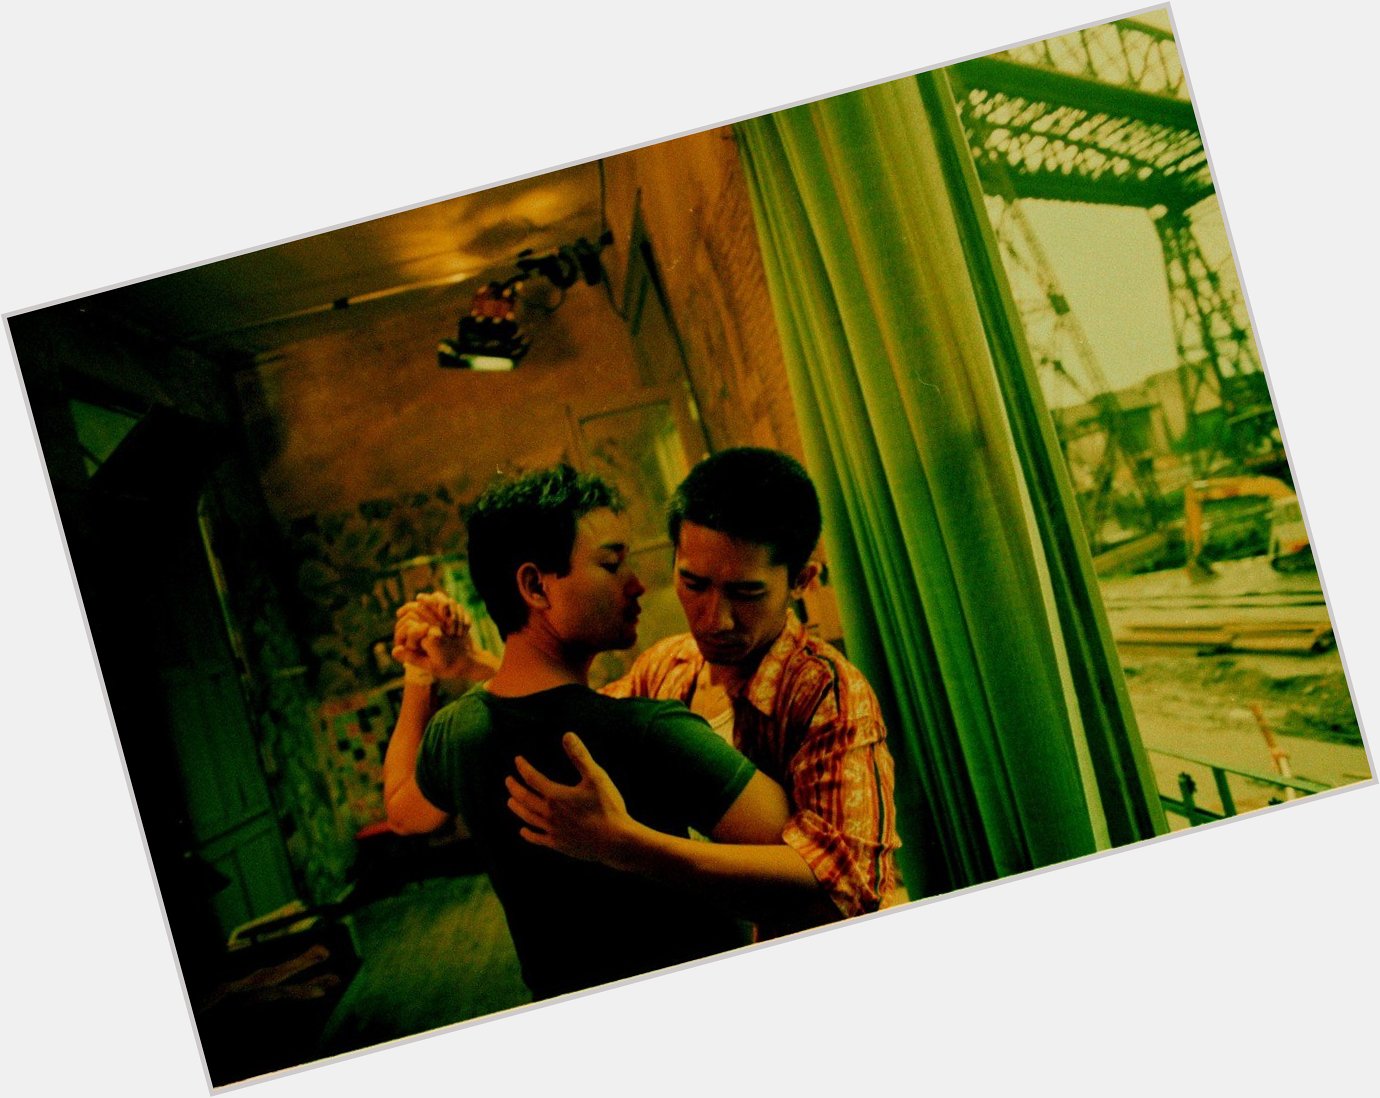 Happy birthday, Wong Kar-wai. What is your favorite film of his?  